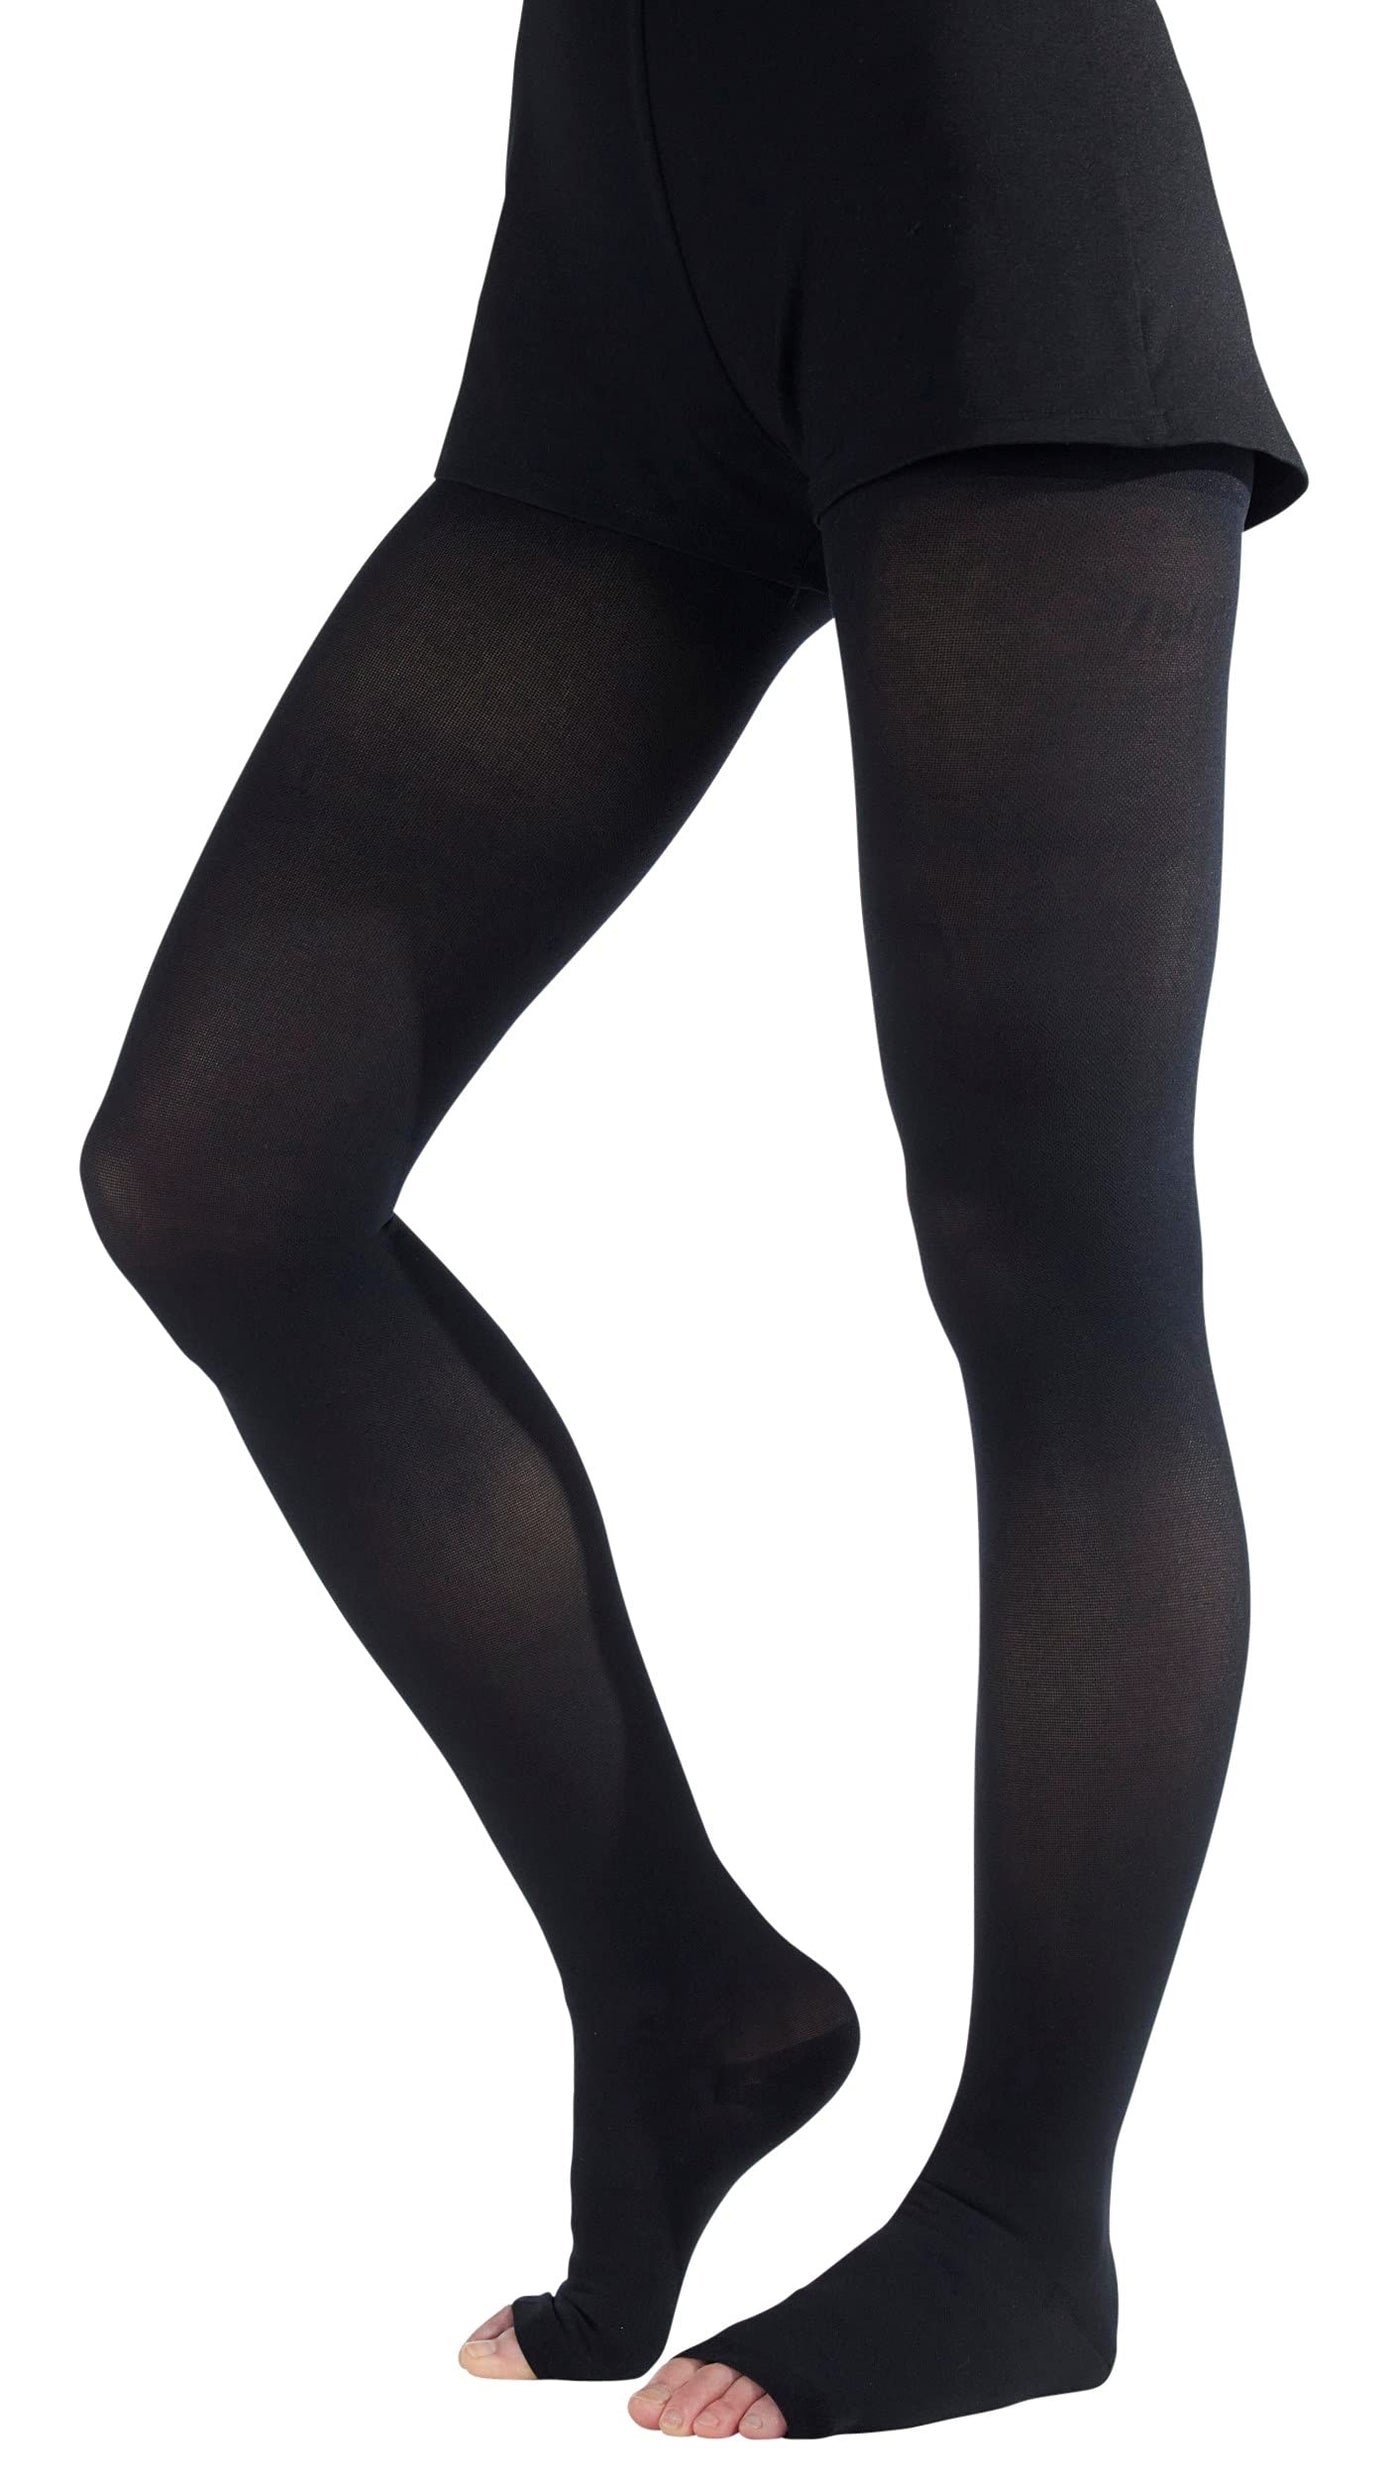 ABSOLUTE SUPPORT - Opaque Compression Stockings Pantyhose Women 20